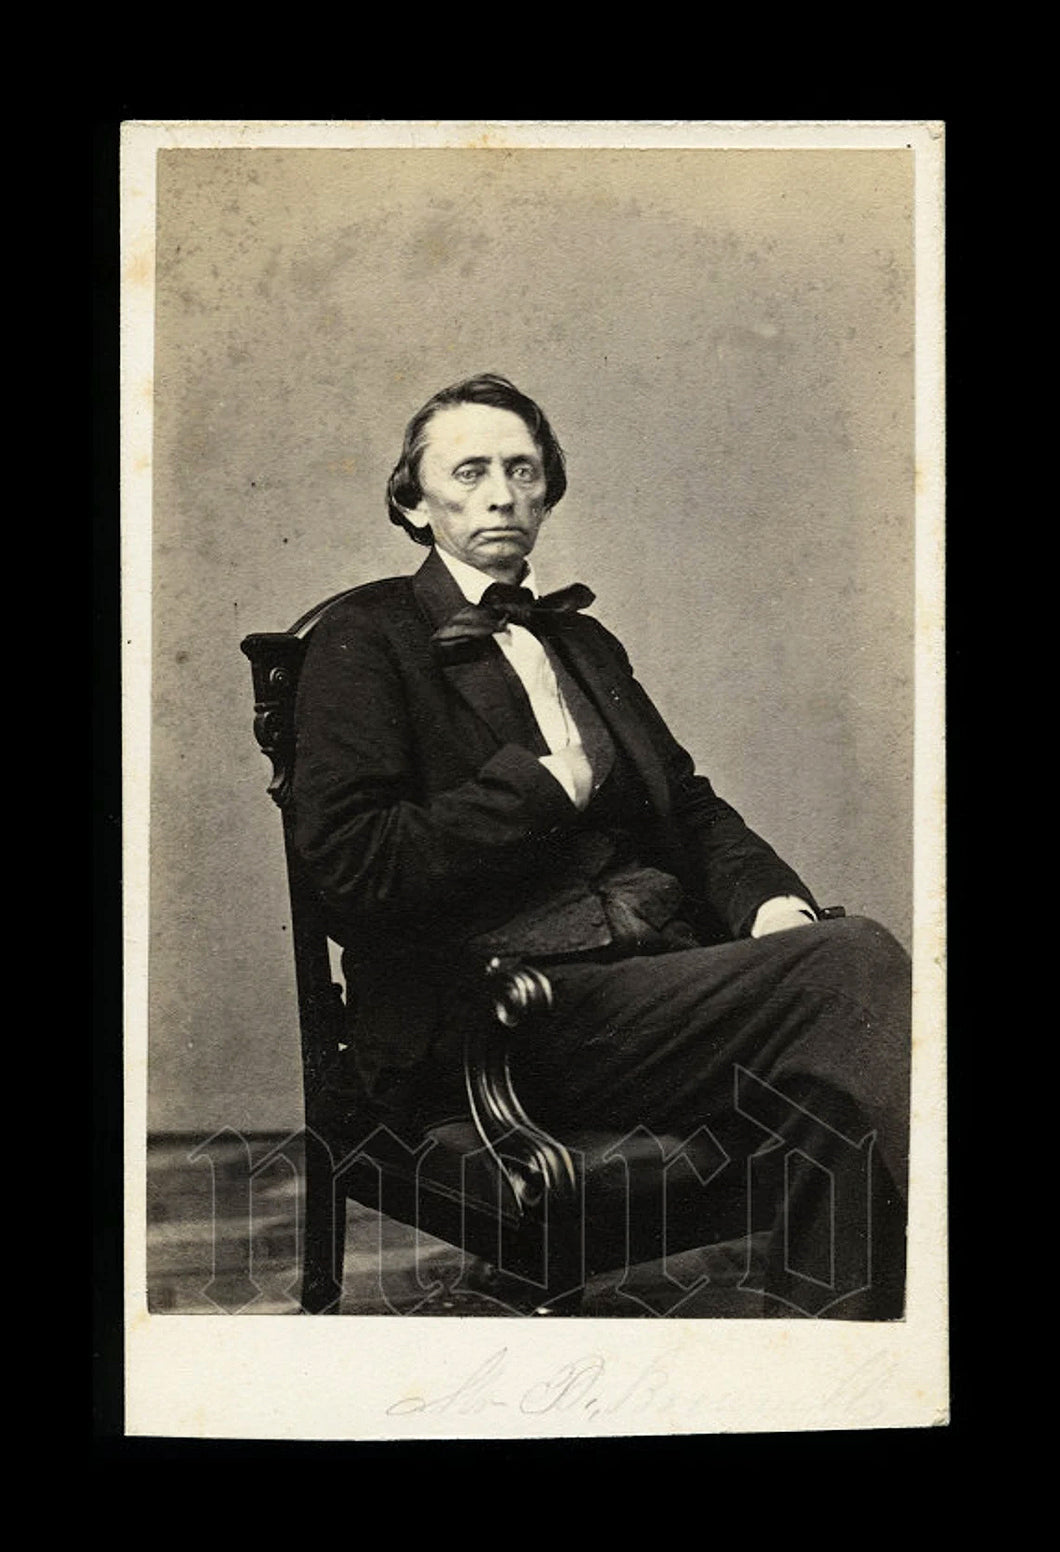 Parson Brownlow by Fassett Lincoln Family Photographer 1860s CDV